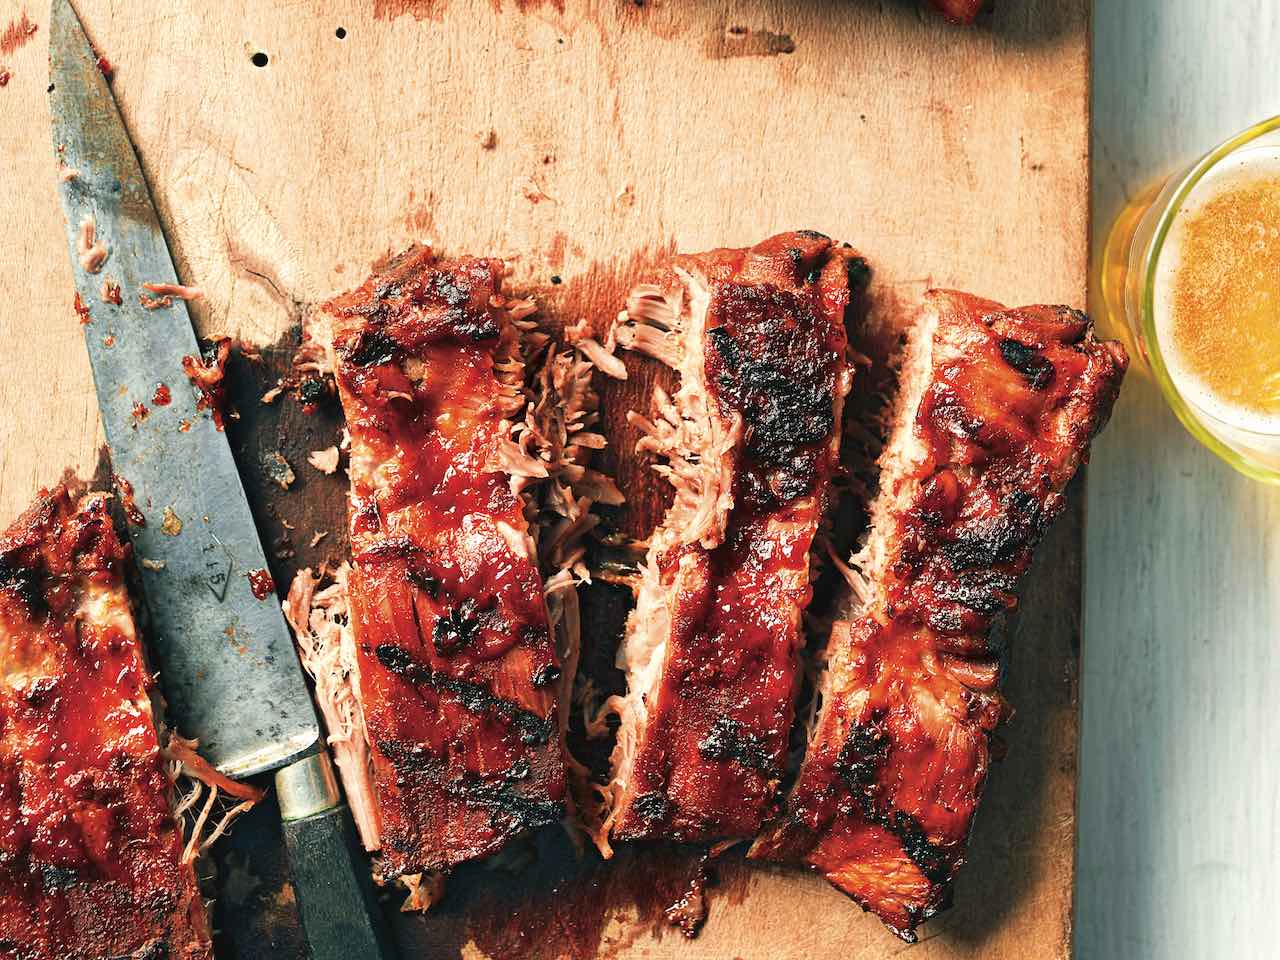 Saucy grilled pork ribs on cutting board.